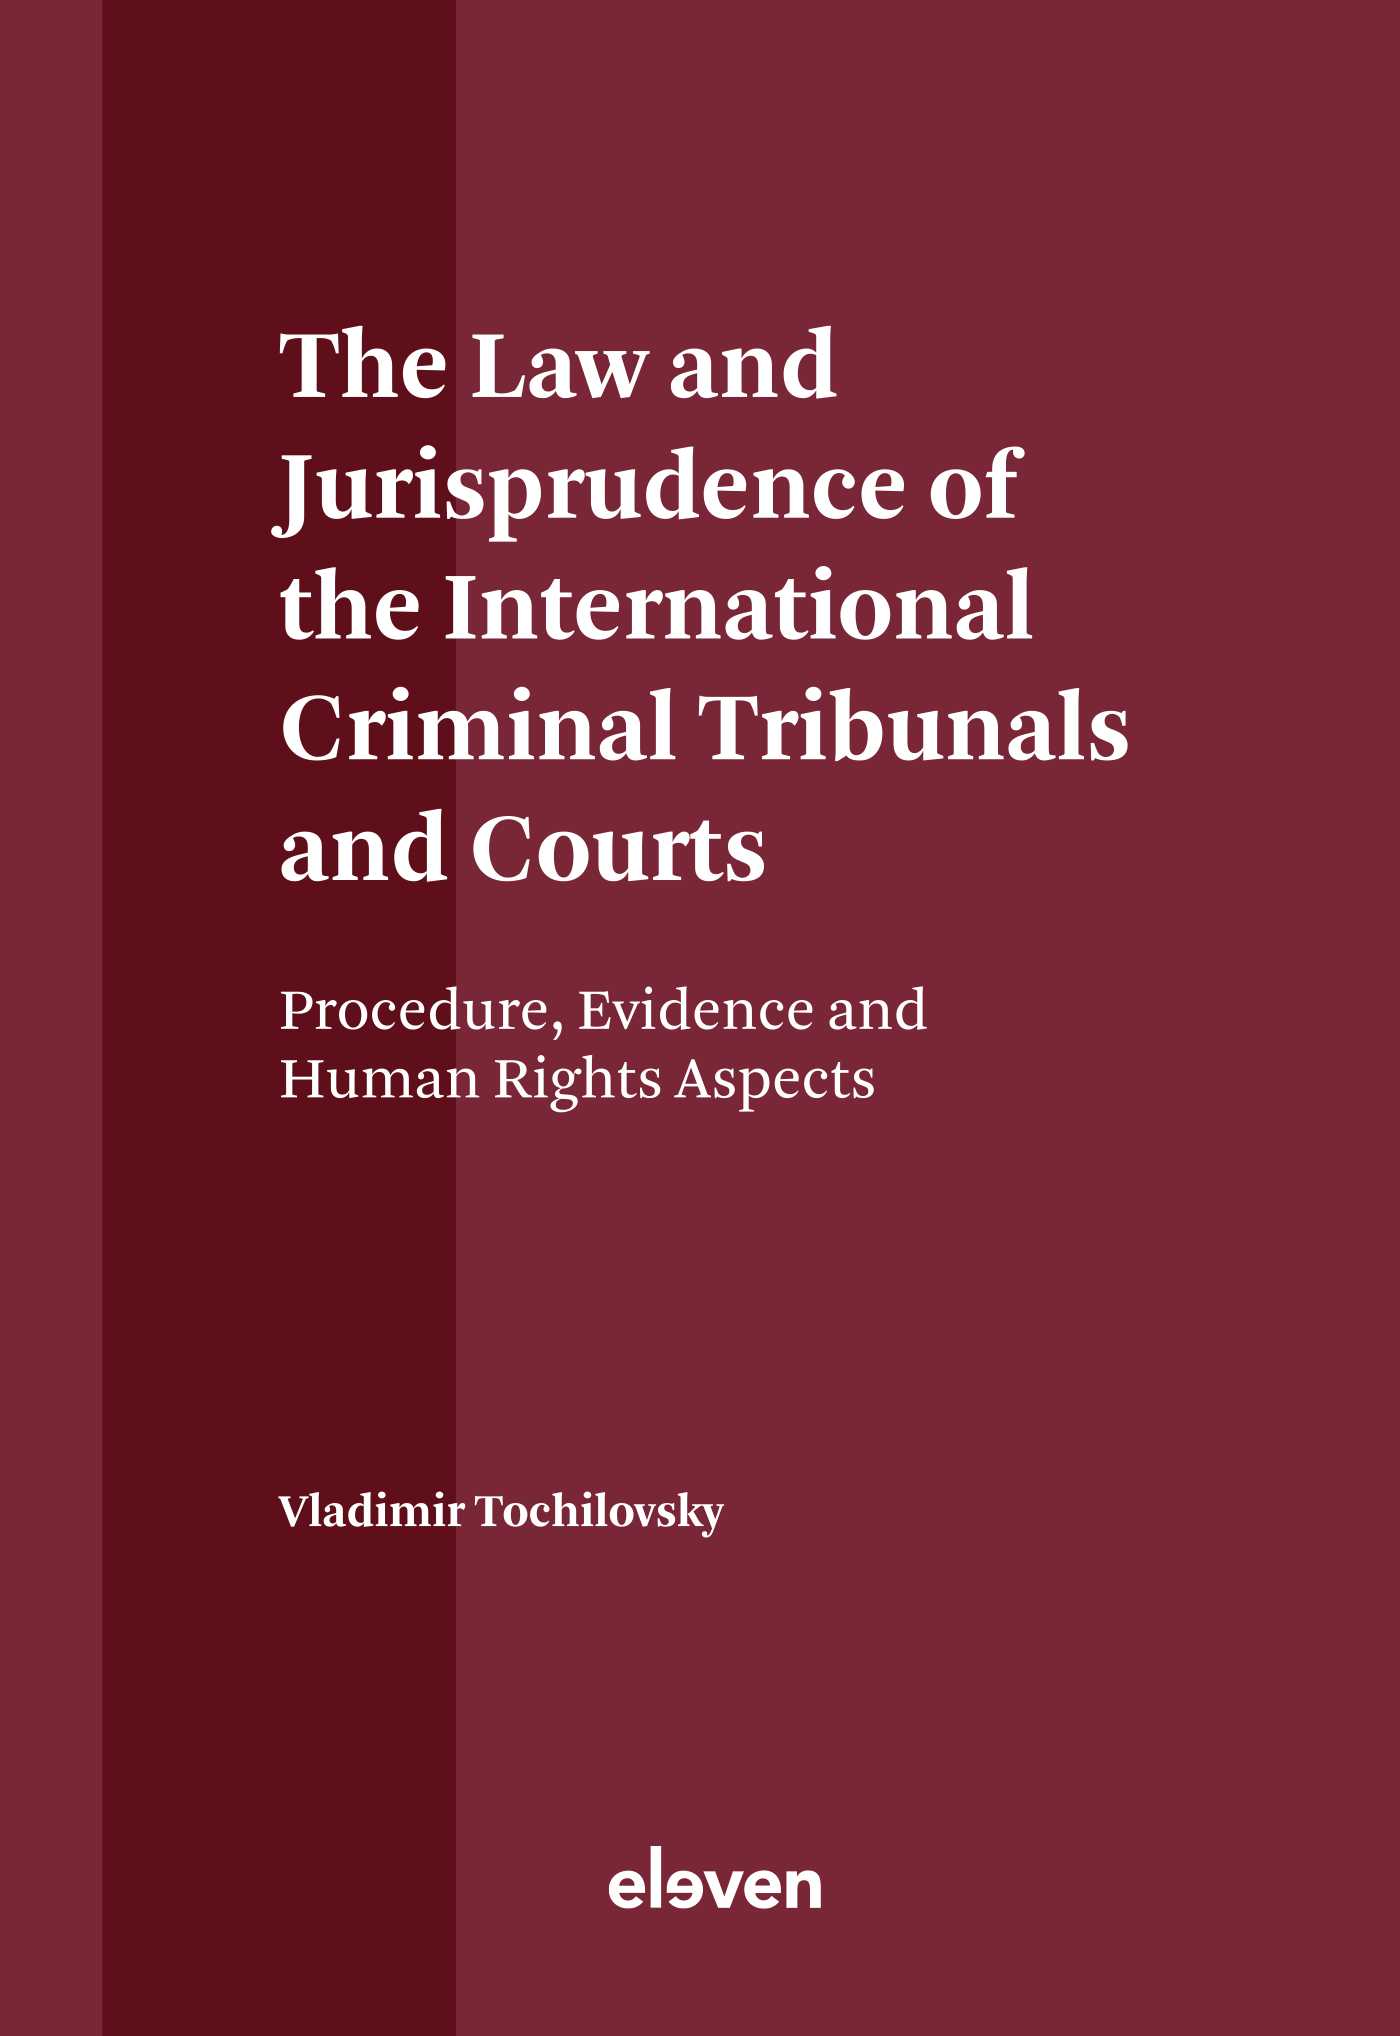 Tribunals　of　and　Tochilovsky　The　Eleven　Courts　Jurisprudence　International　Law　and　9789462362499　the　Criminal